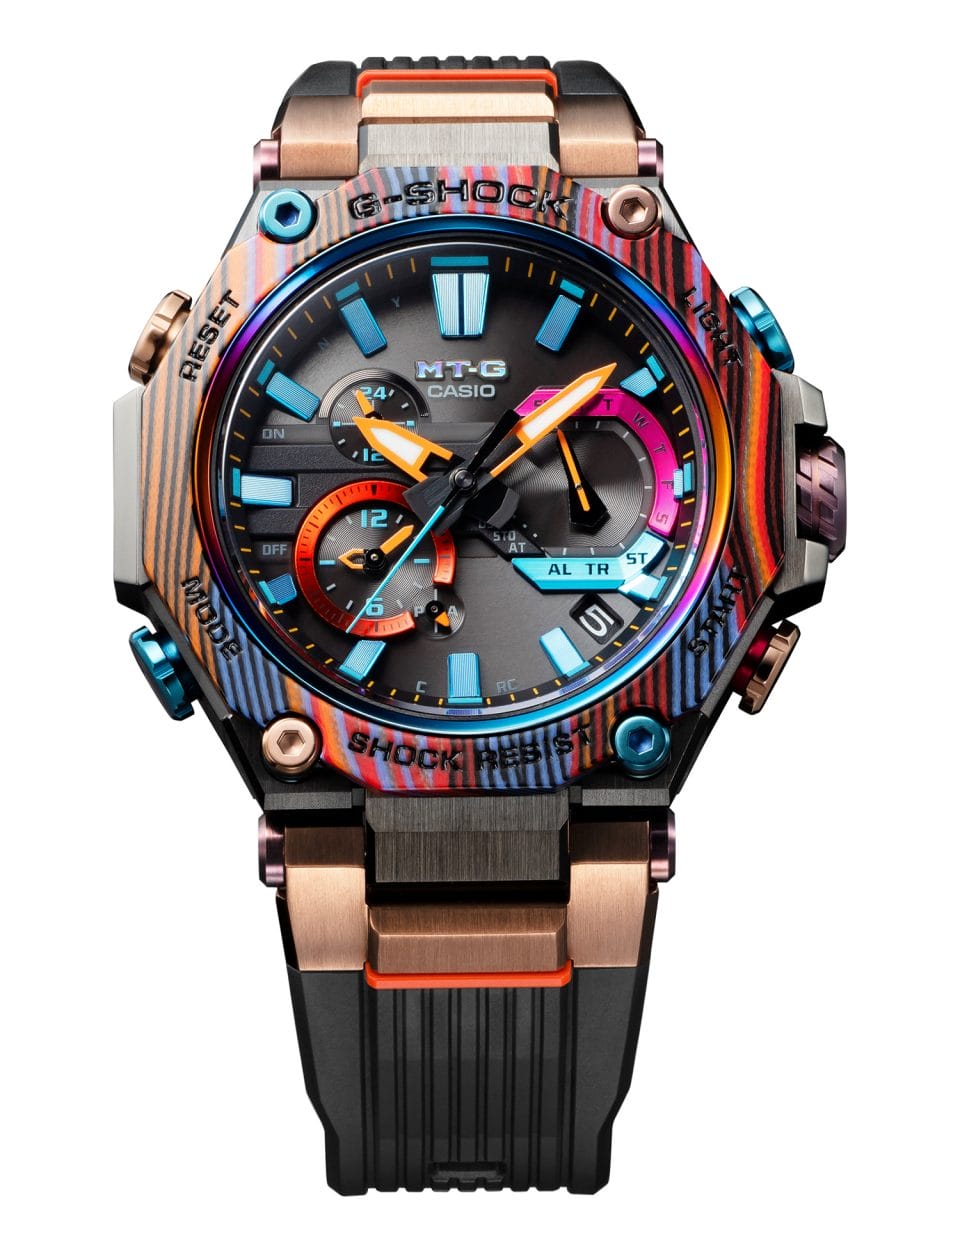 The Gift of Colourful Watches